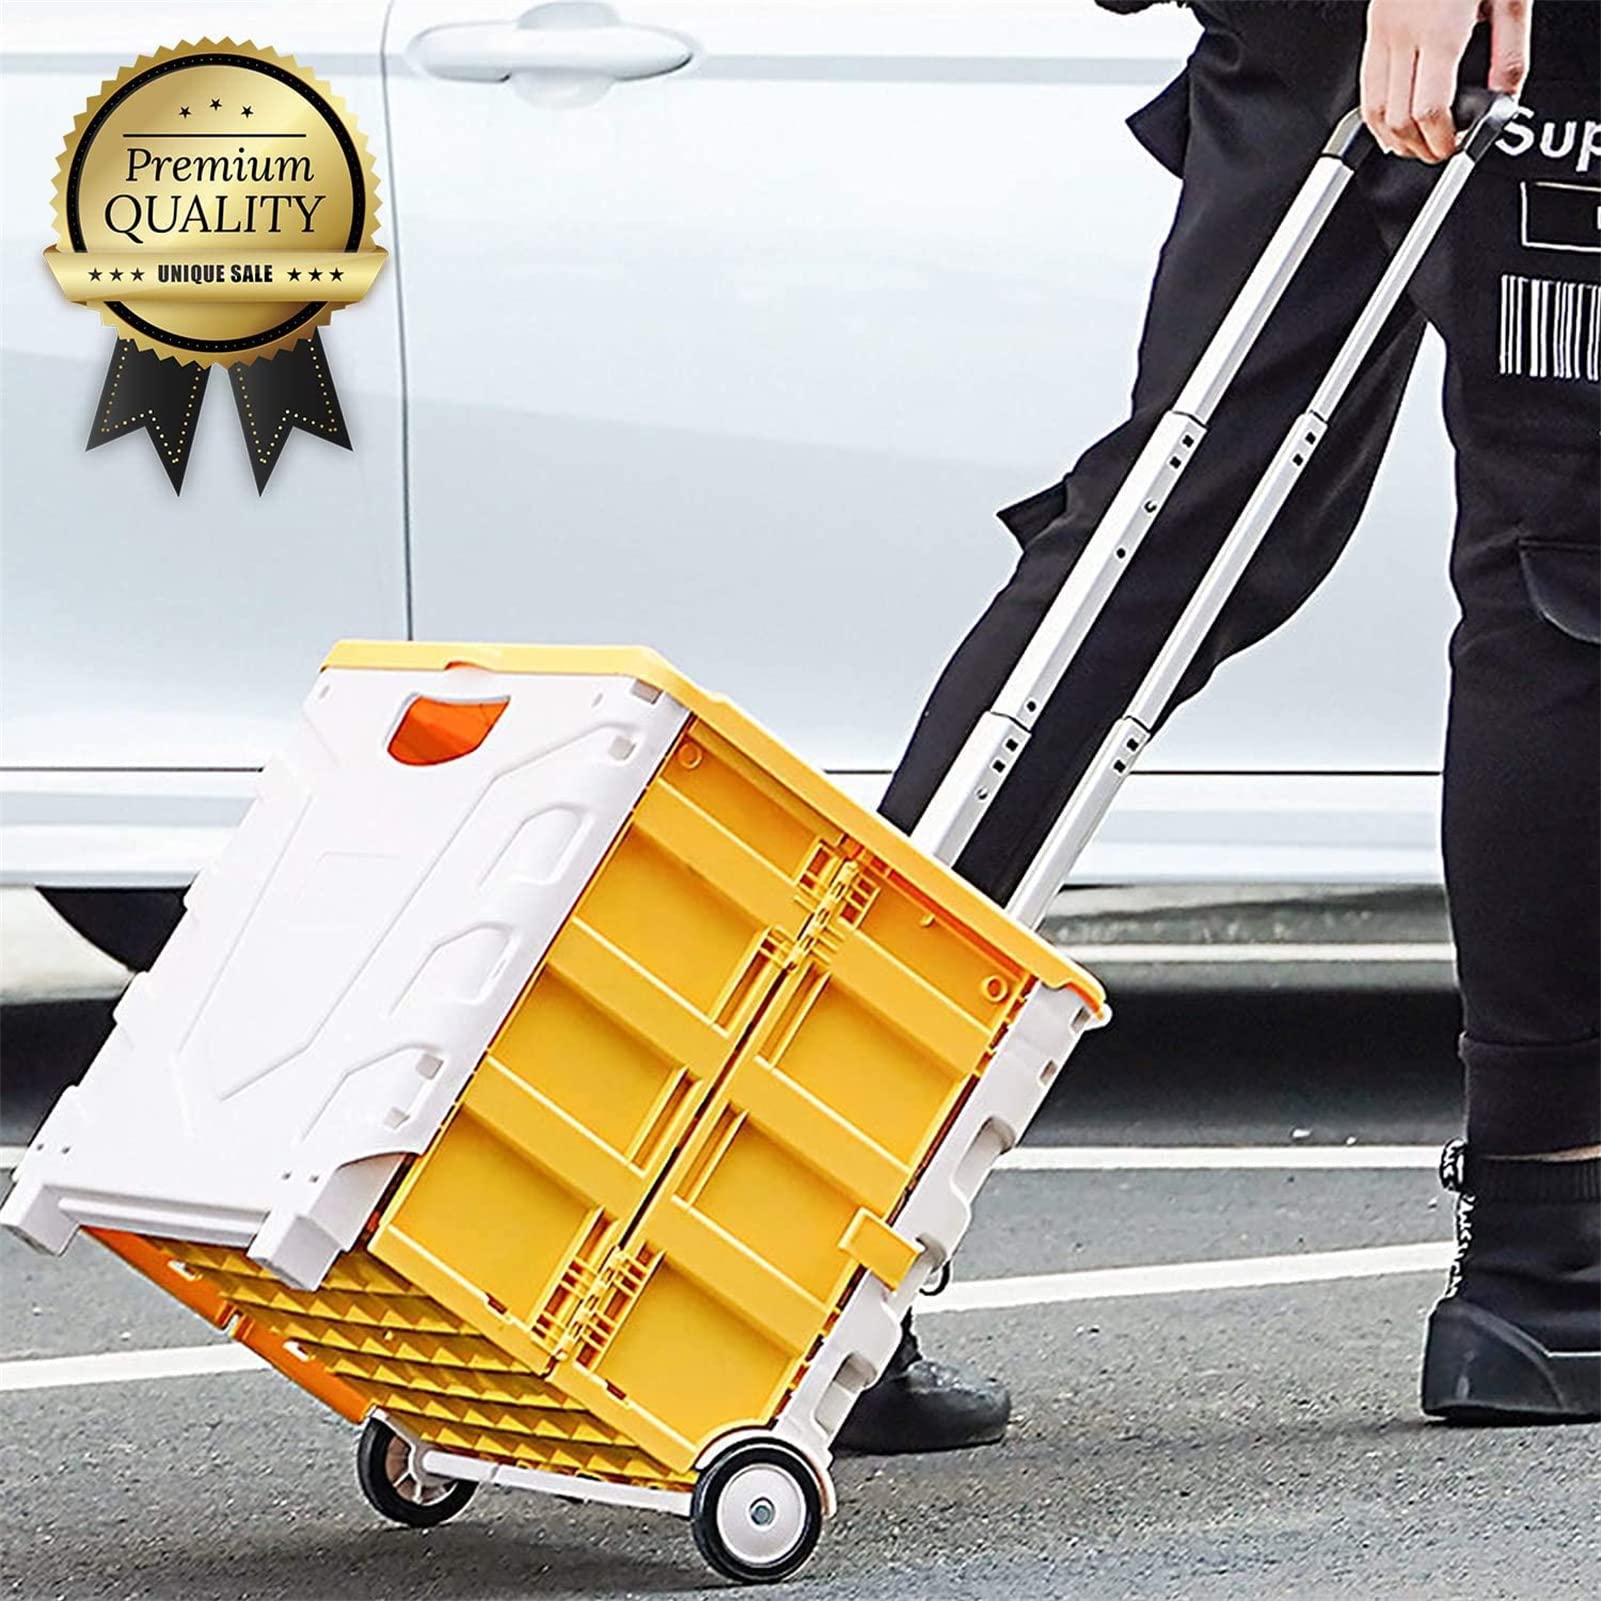 Foldable Utility Cart,Portable Folding Cart Tools Carrier with Telescopic Handle Heavy Duty Shopping Cart with 360degree Rolling Swivel Wheels for Travel Shopping Moving Luggage(Yellow),Yellow